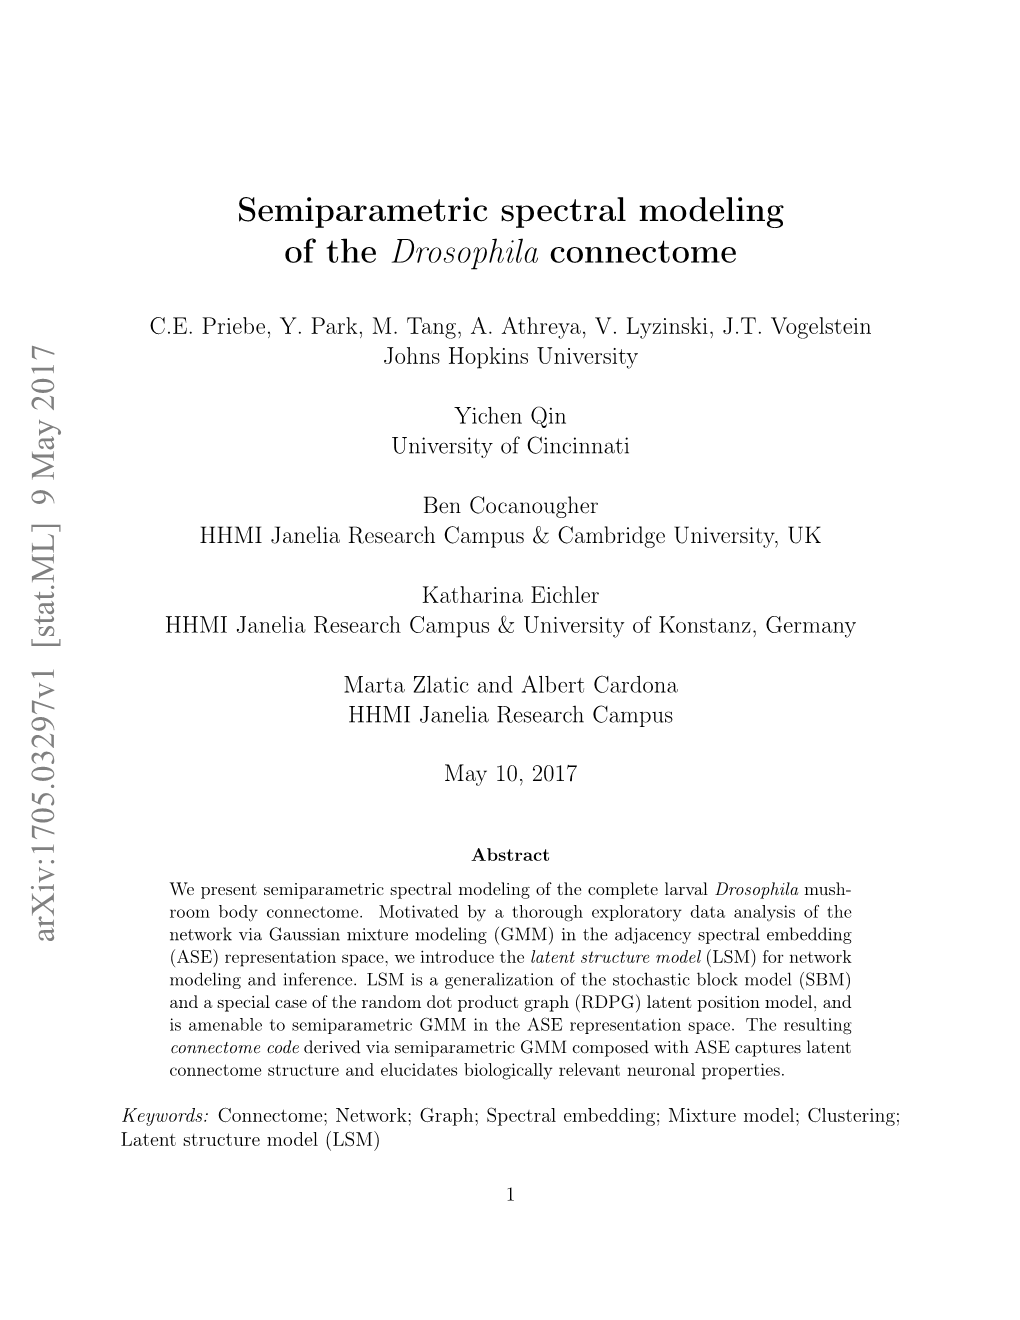 Semiparametric Spectral Modeling of the Drosophila Connectome Arxiv